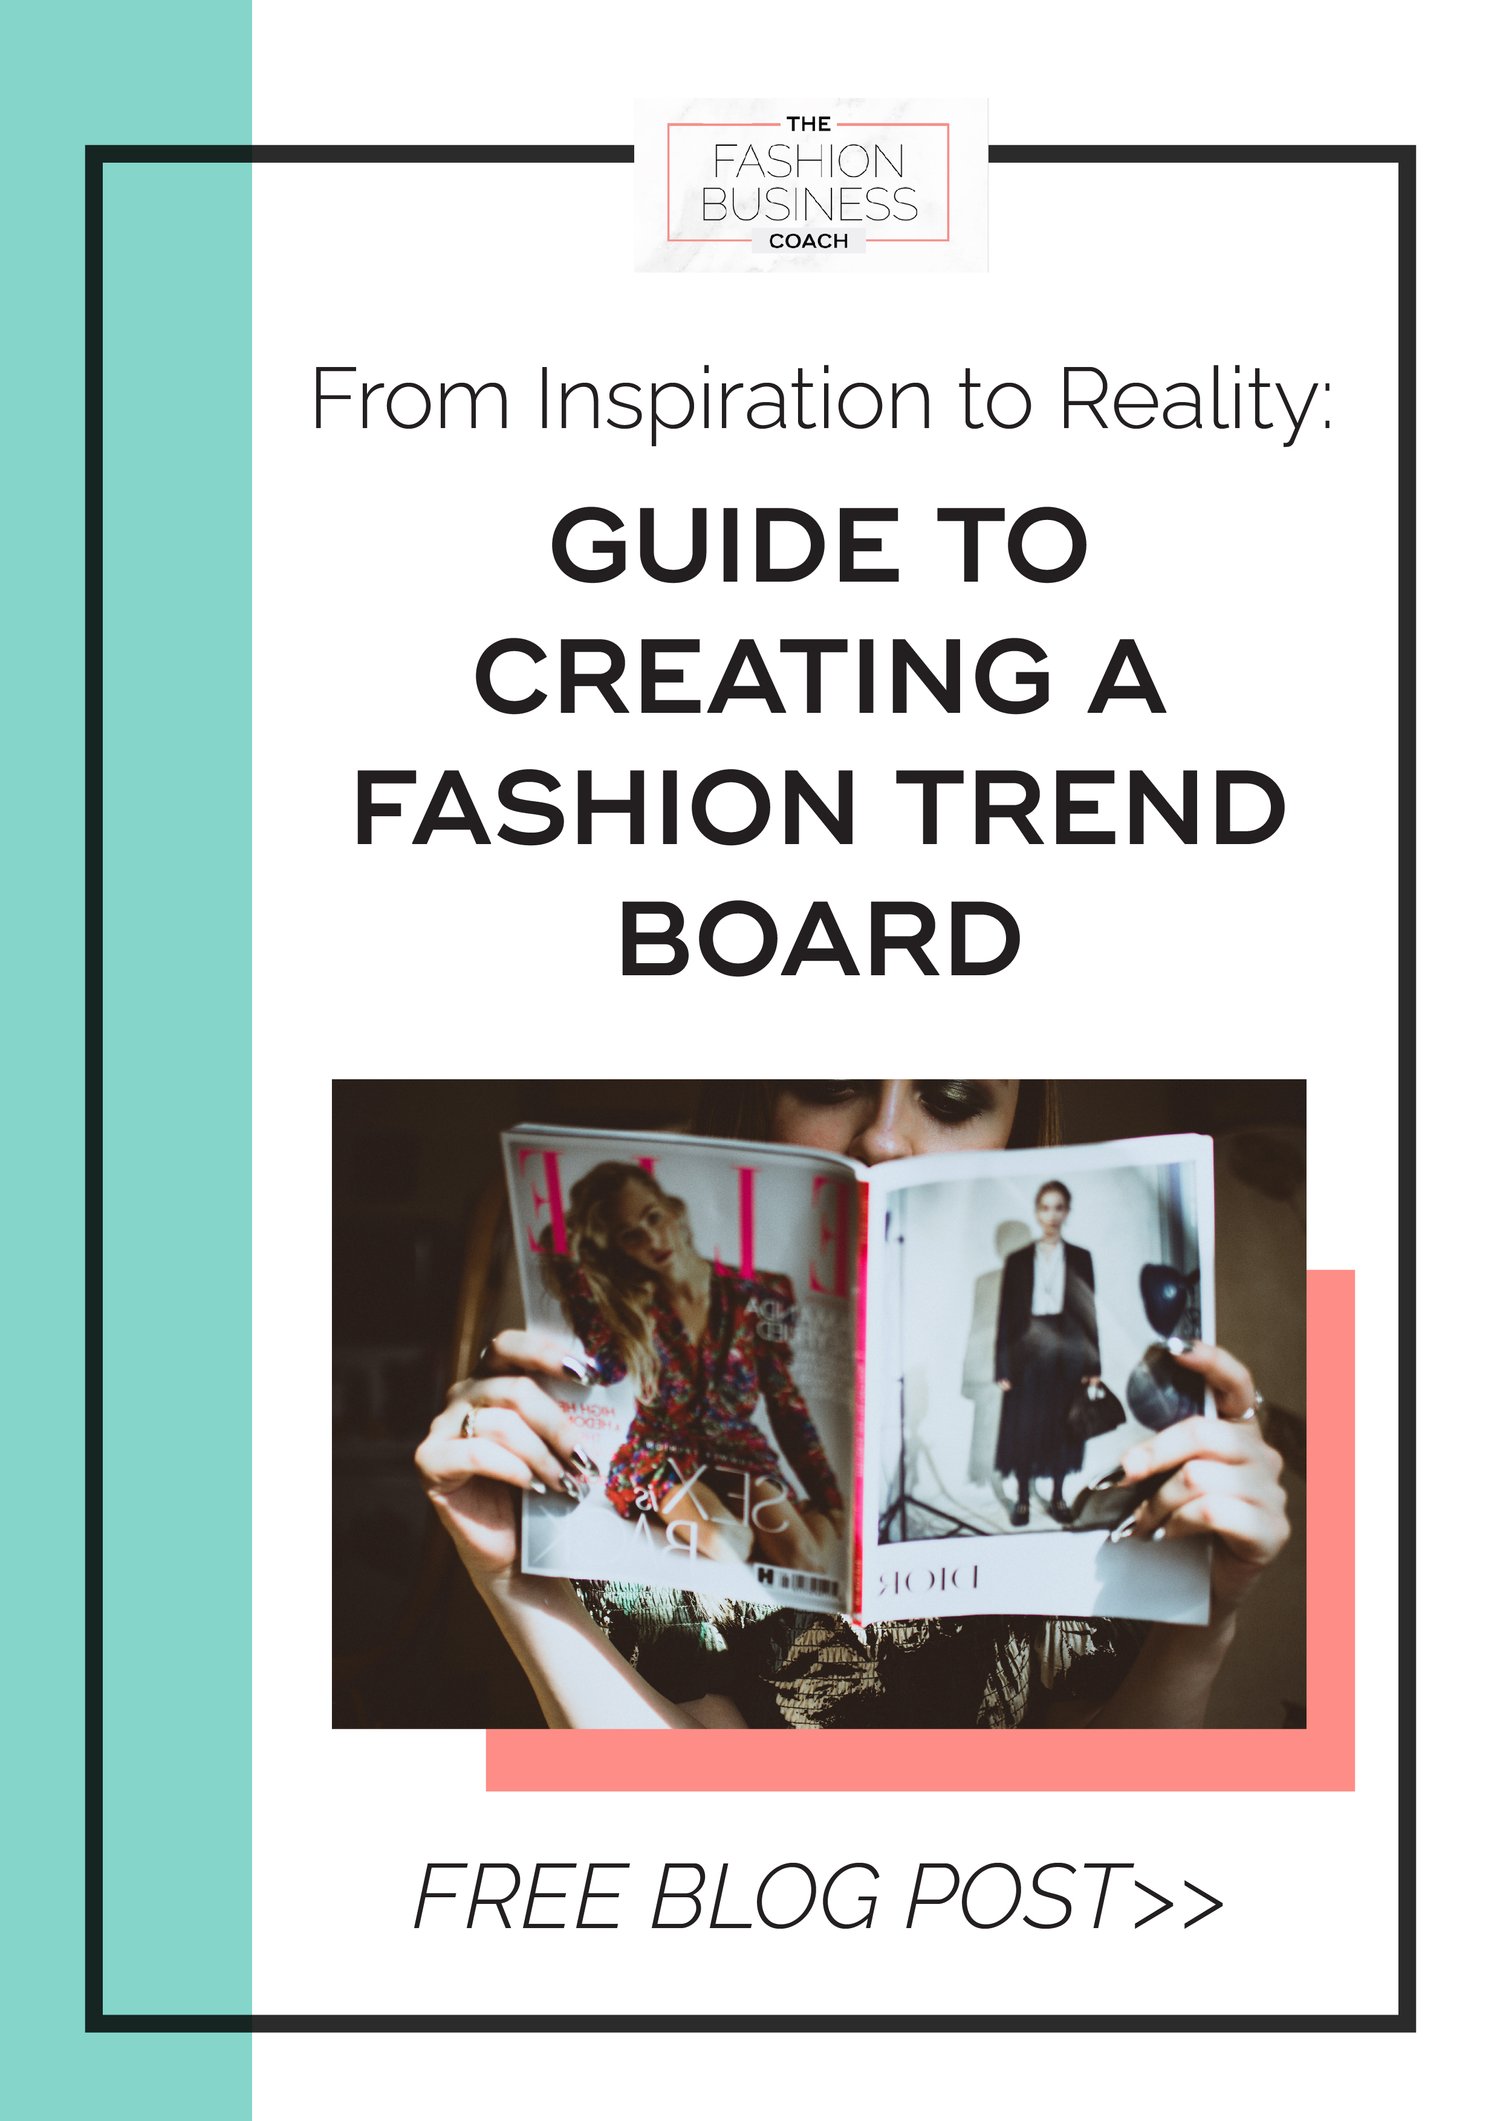 Trend mood board to design fashion and accessories collections